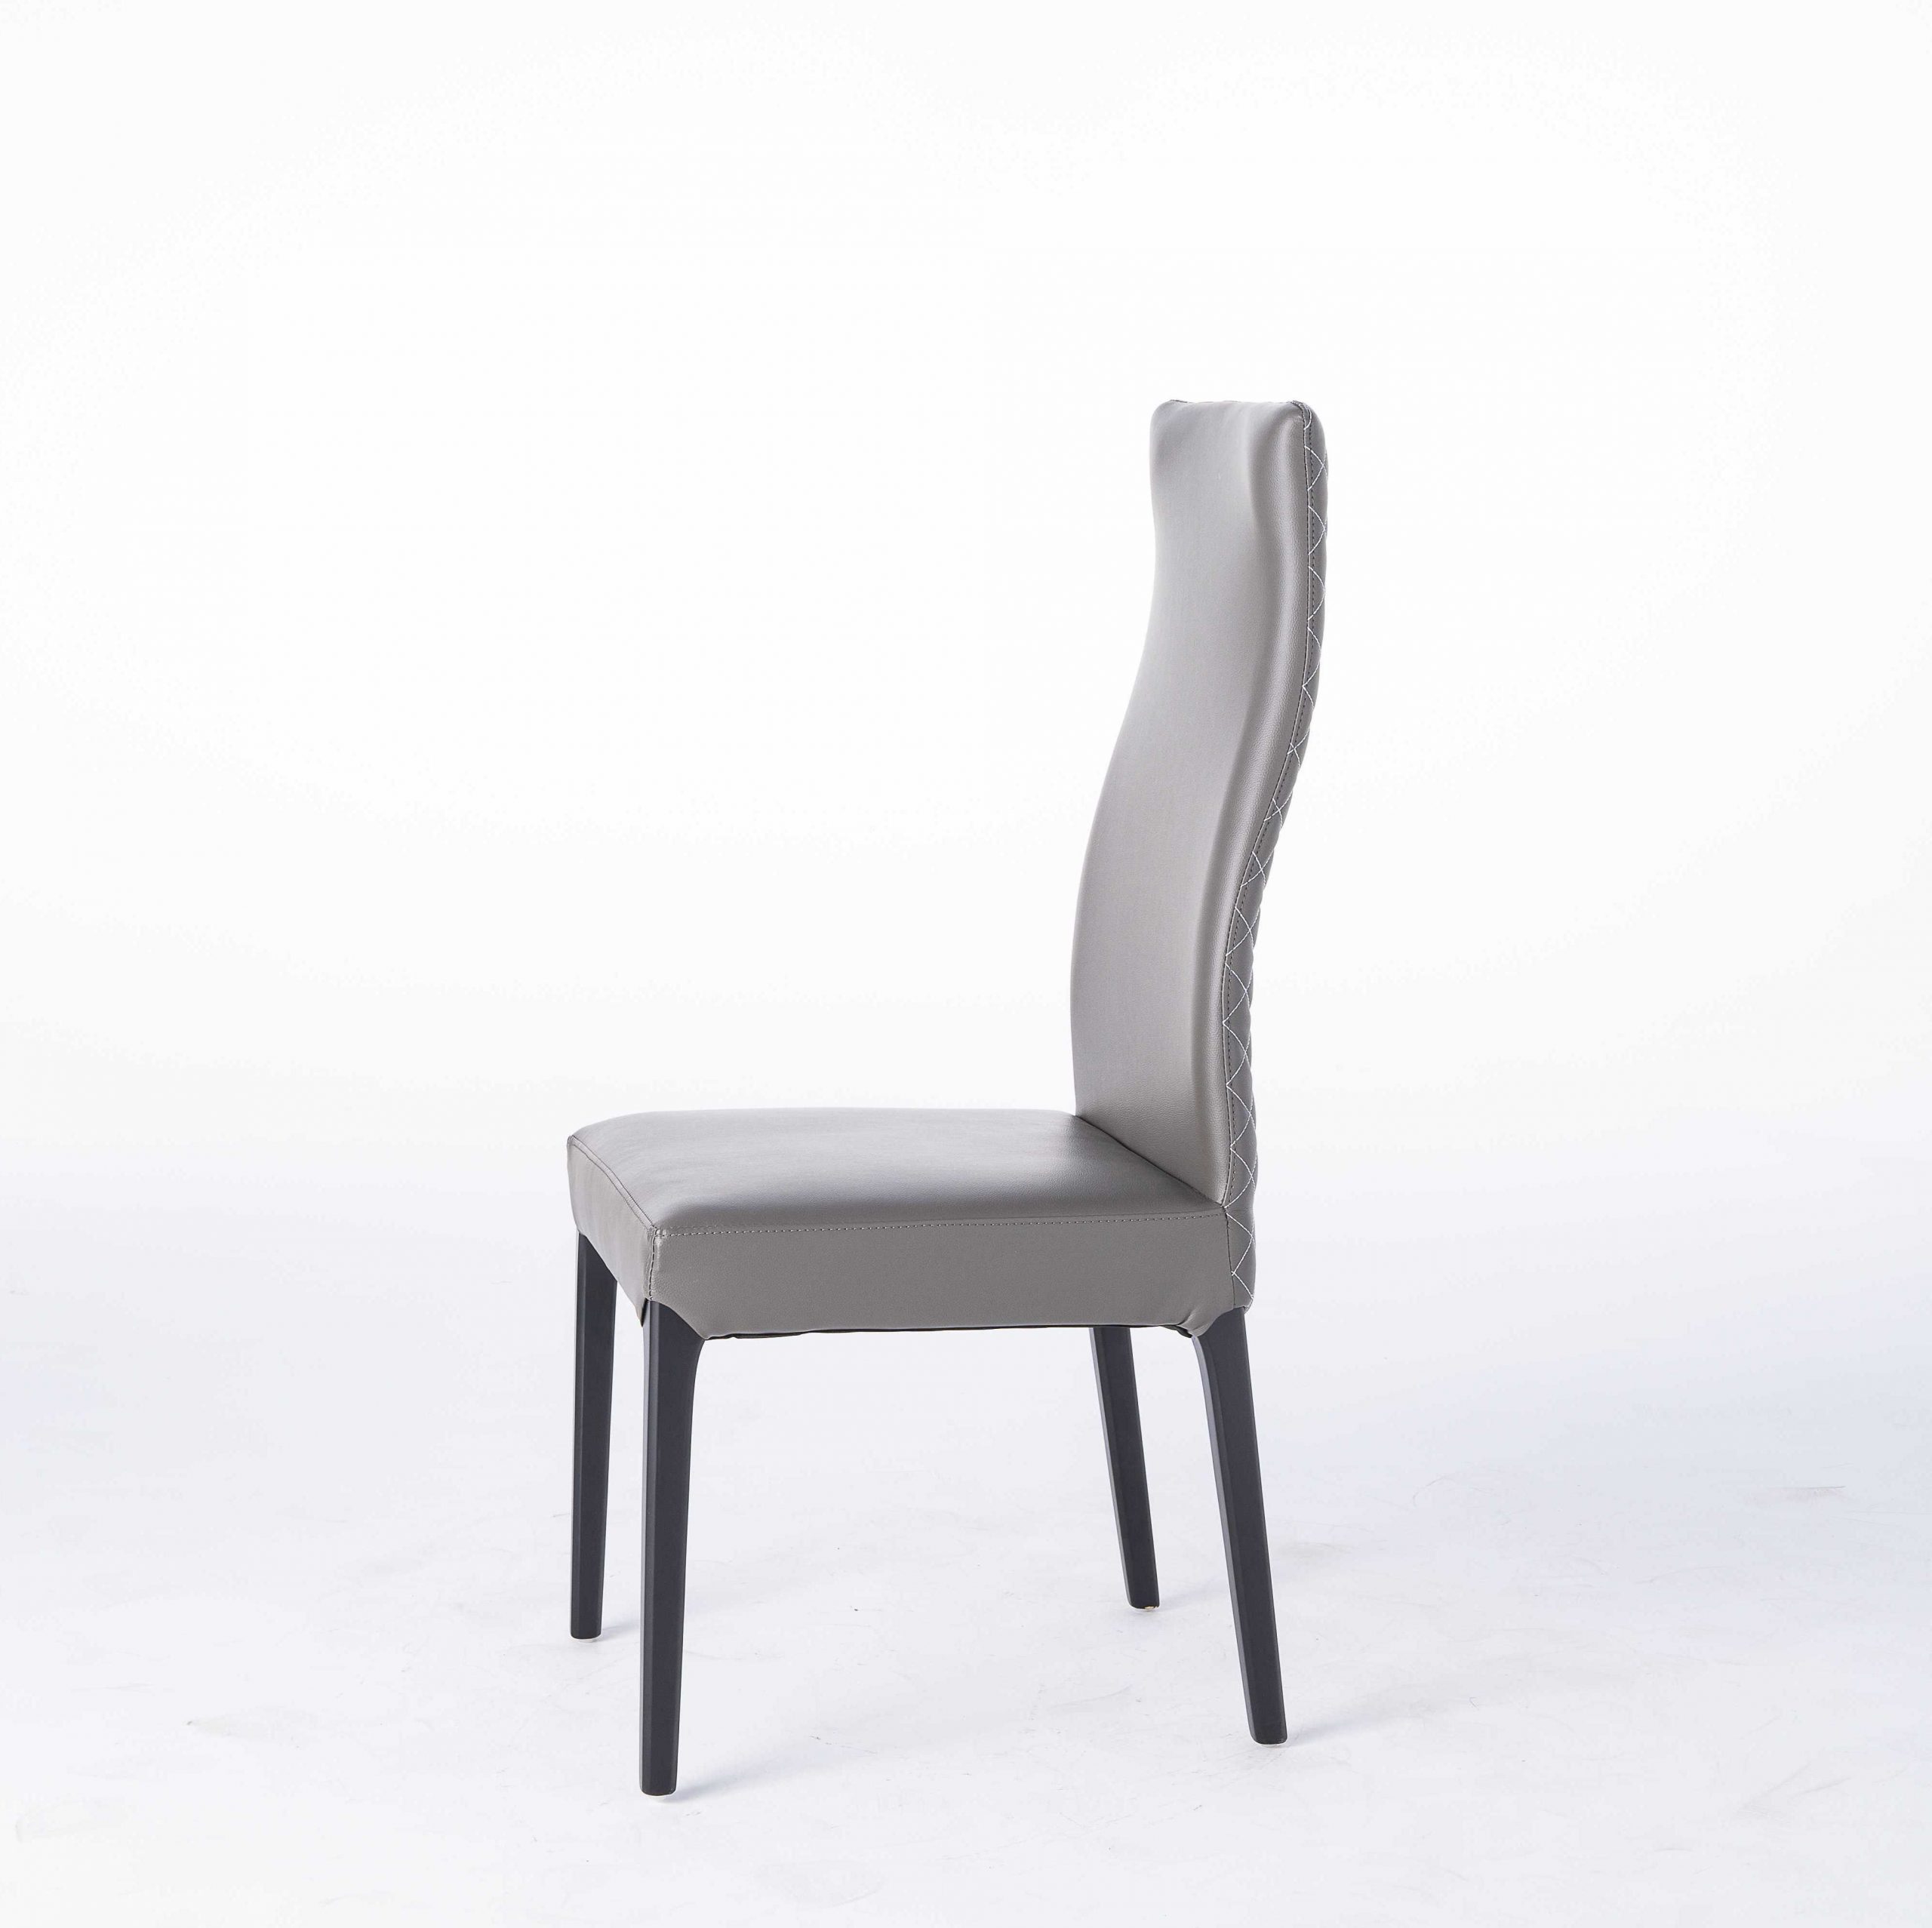 dkf14-1china contemporary modern home furniture kitchen leather fabric dining chair manufacturer (1)